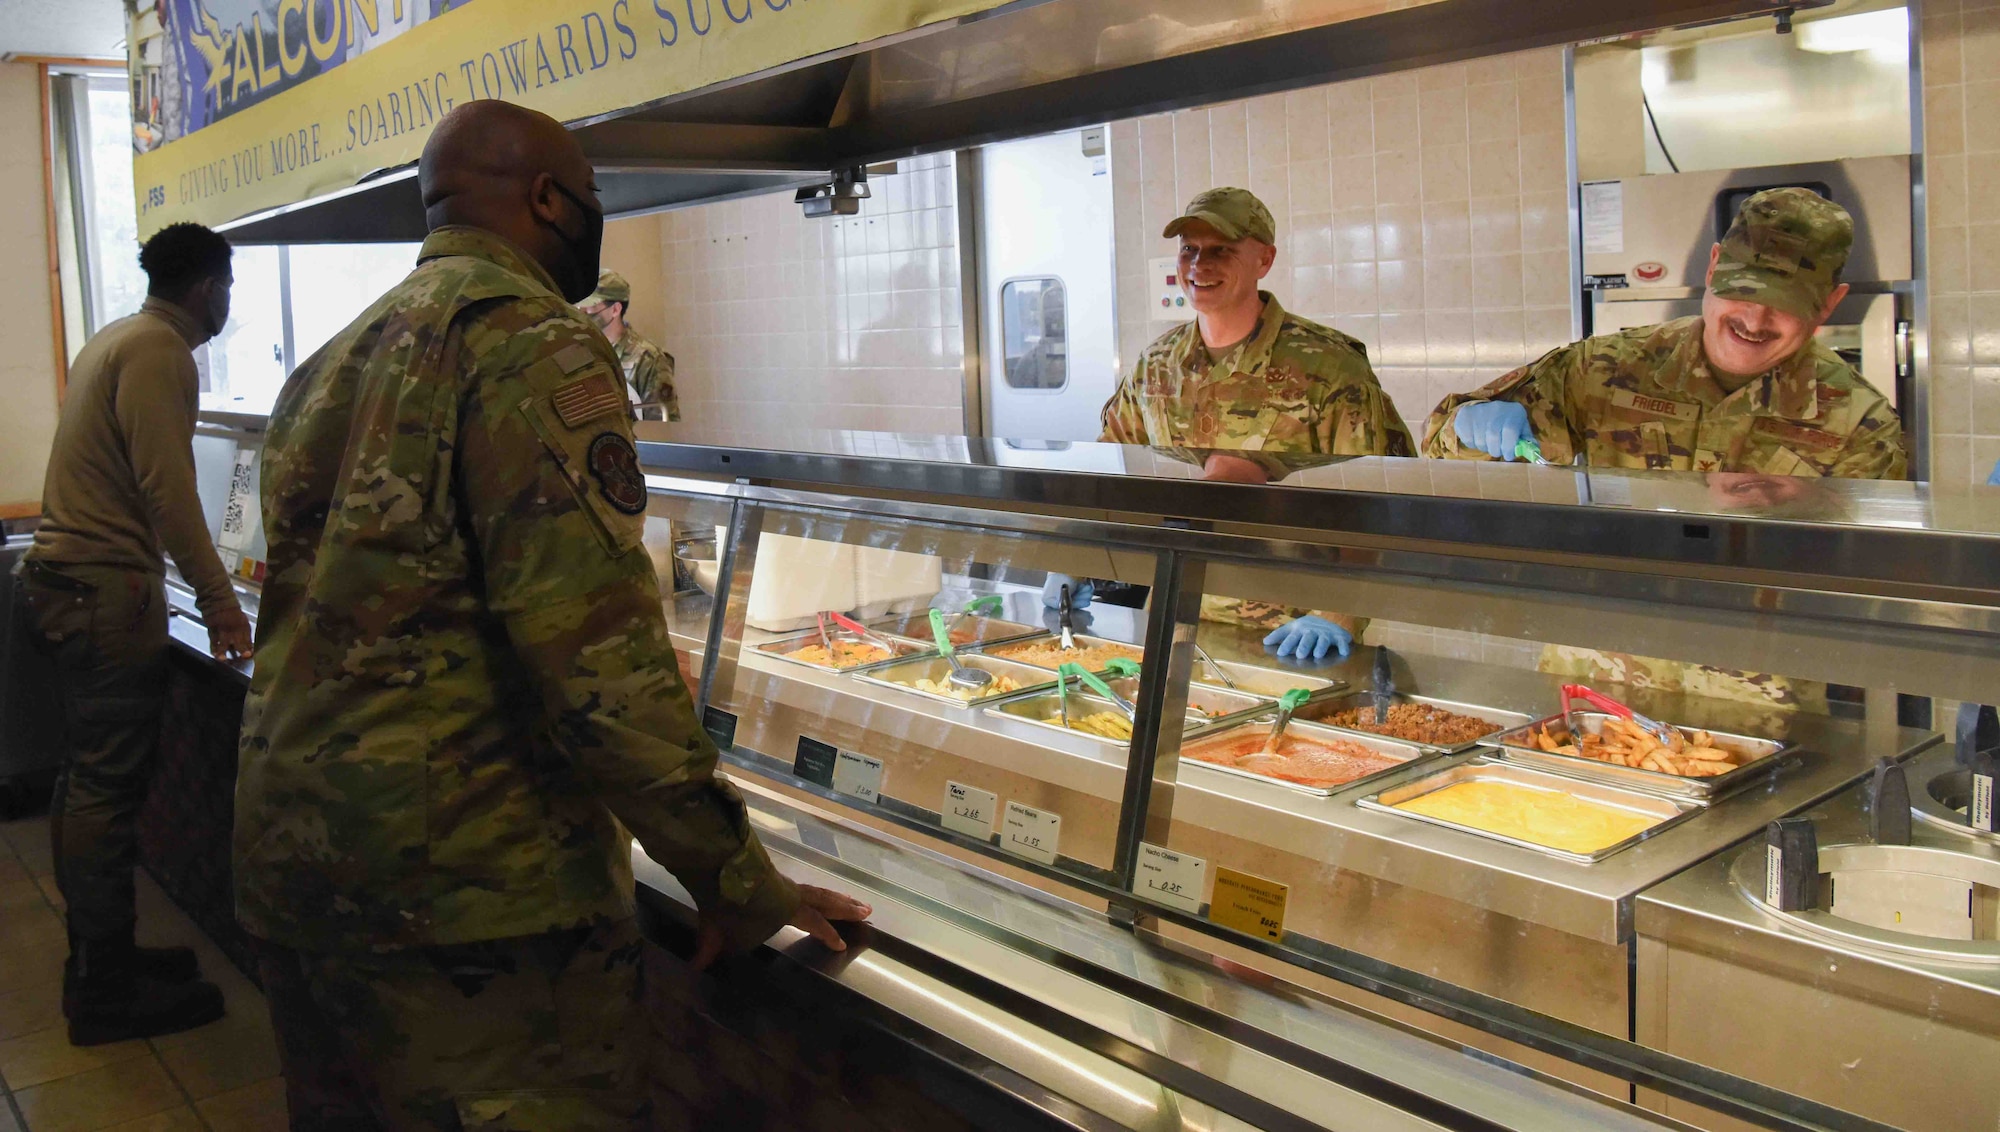 A service member fixes a plate of food to another service member